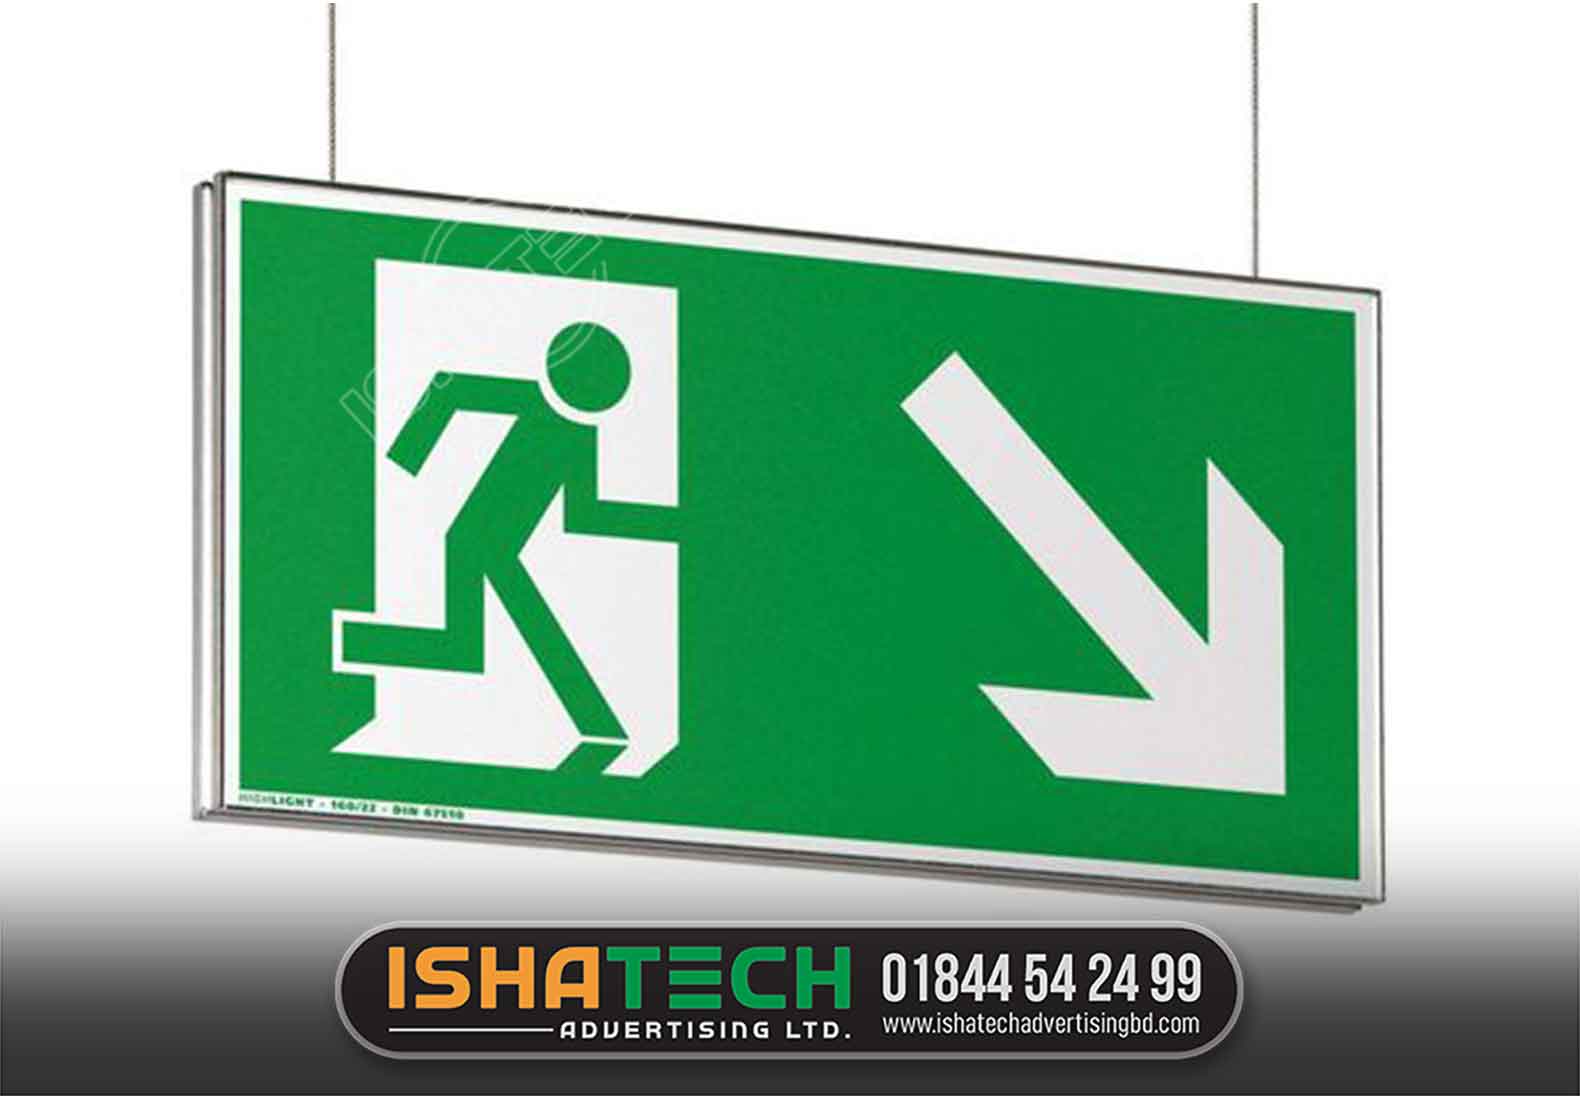 IN OUT ICON DIRECTIONAL SIGNS, FIRE SAFETY SIGNS, SIGNAGE COMPANY IN DHAKA, BANGLADESH